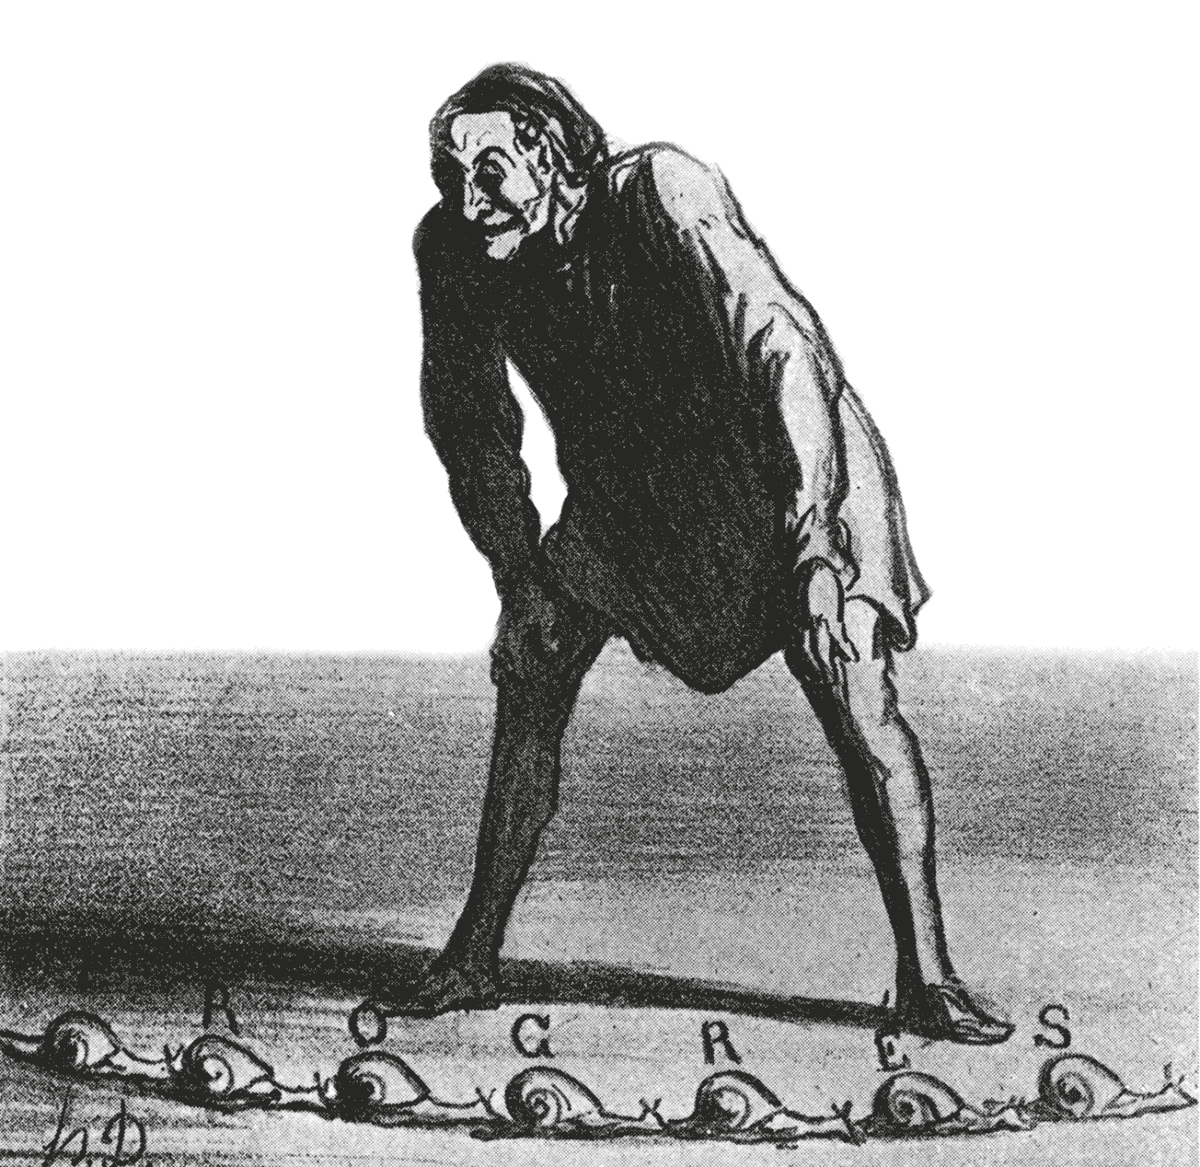 Honoré Daumier, Les escargots non sympathiques, published in Le Charivari, 25 September 1869. Nineteen years after Jules Allix’s article, the trope of “sympathetic snails” had retained enough currency to be used as the title of this cartoon. Where Allix’s sympathetic snails had promised a world of instantaneous communication, the non-sympathetic snails here represent the slow progress of social reforms promised by the Second Empire to workers like the one depicted in Daumier’s drawing.